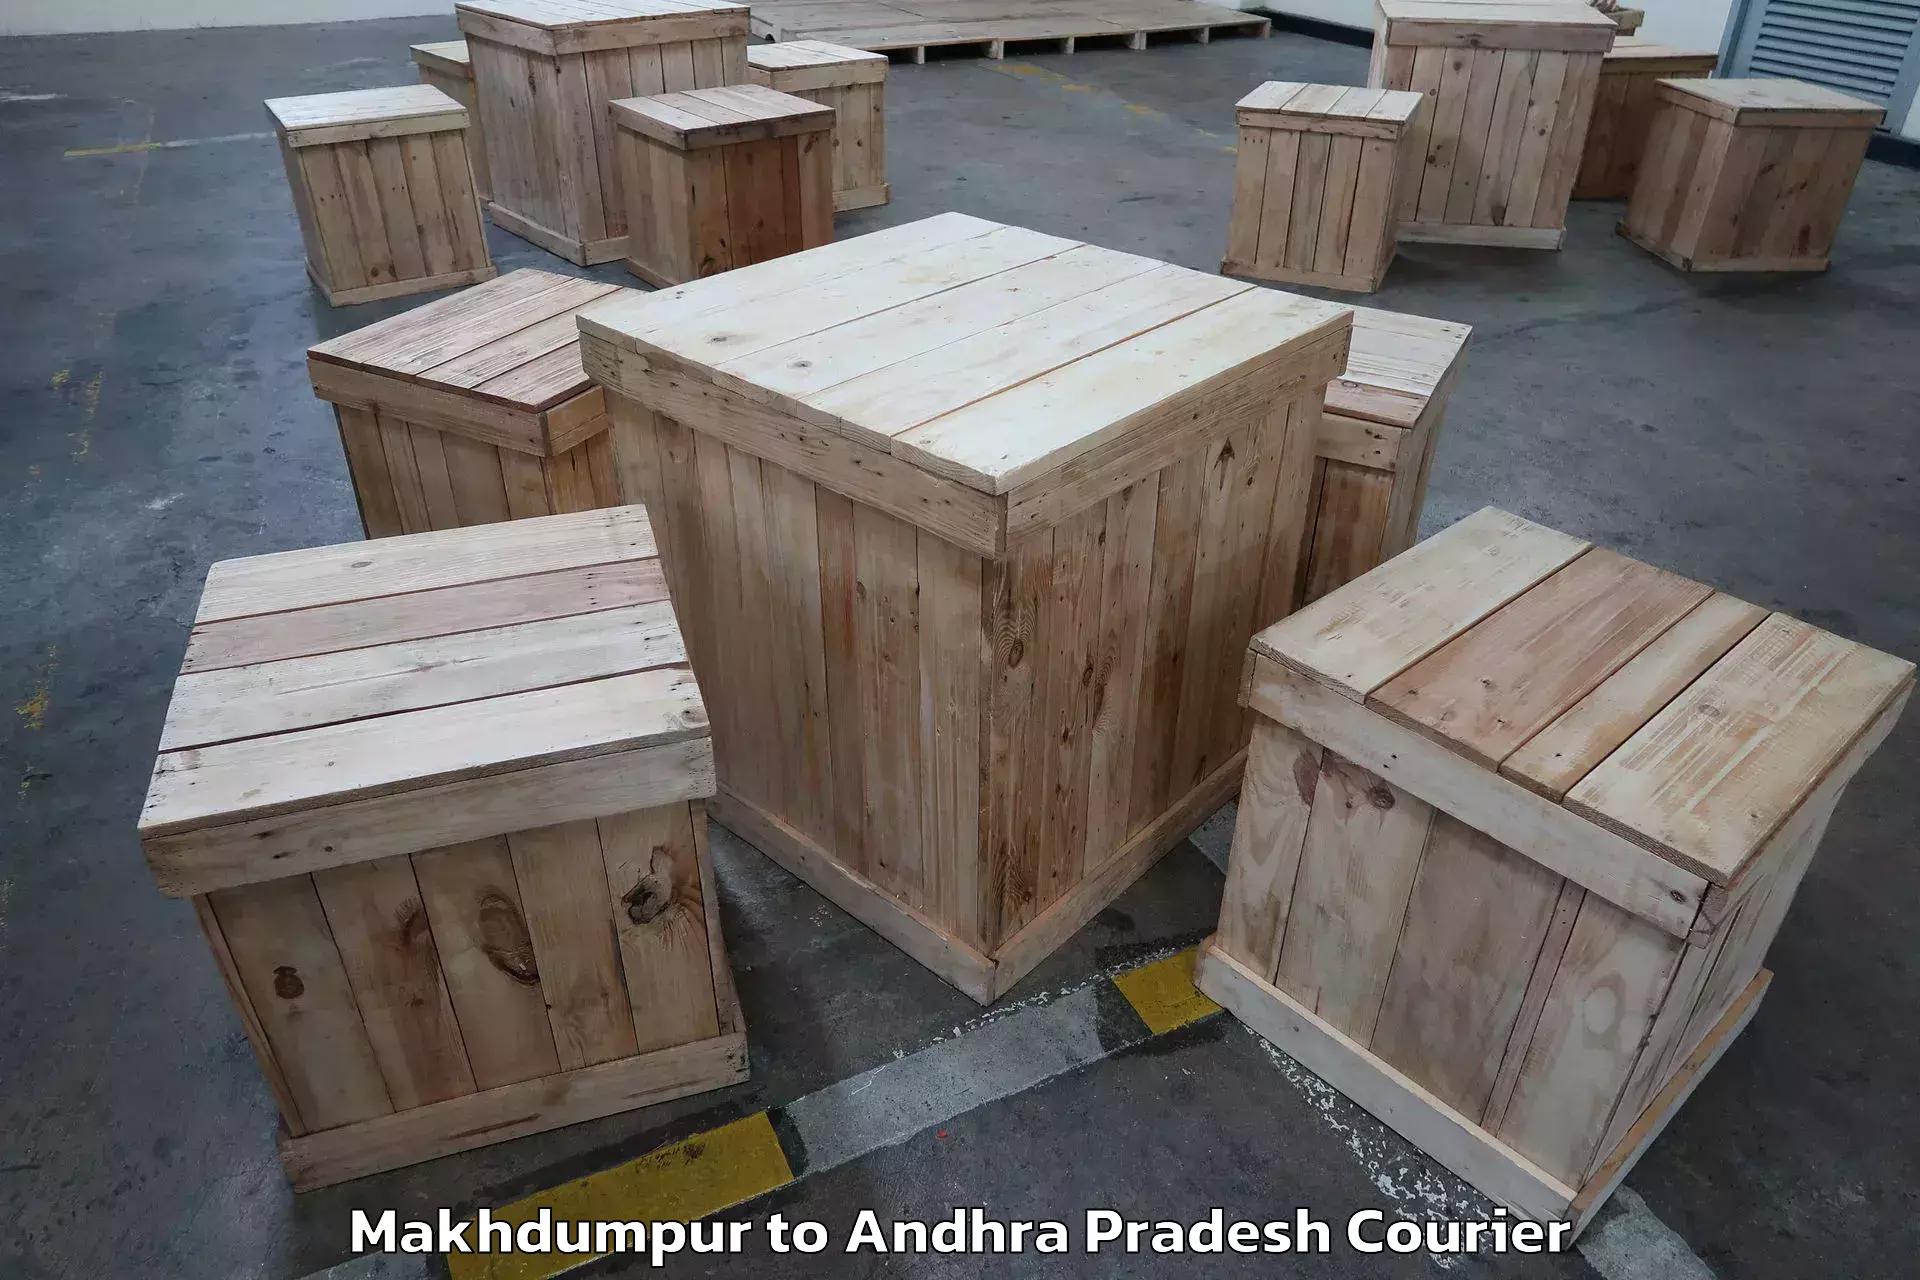 Skilled furniture movers Makhdumpur to Visakhapatnam Port